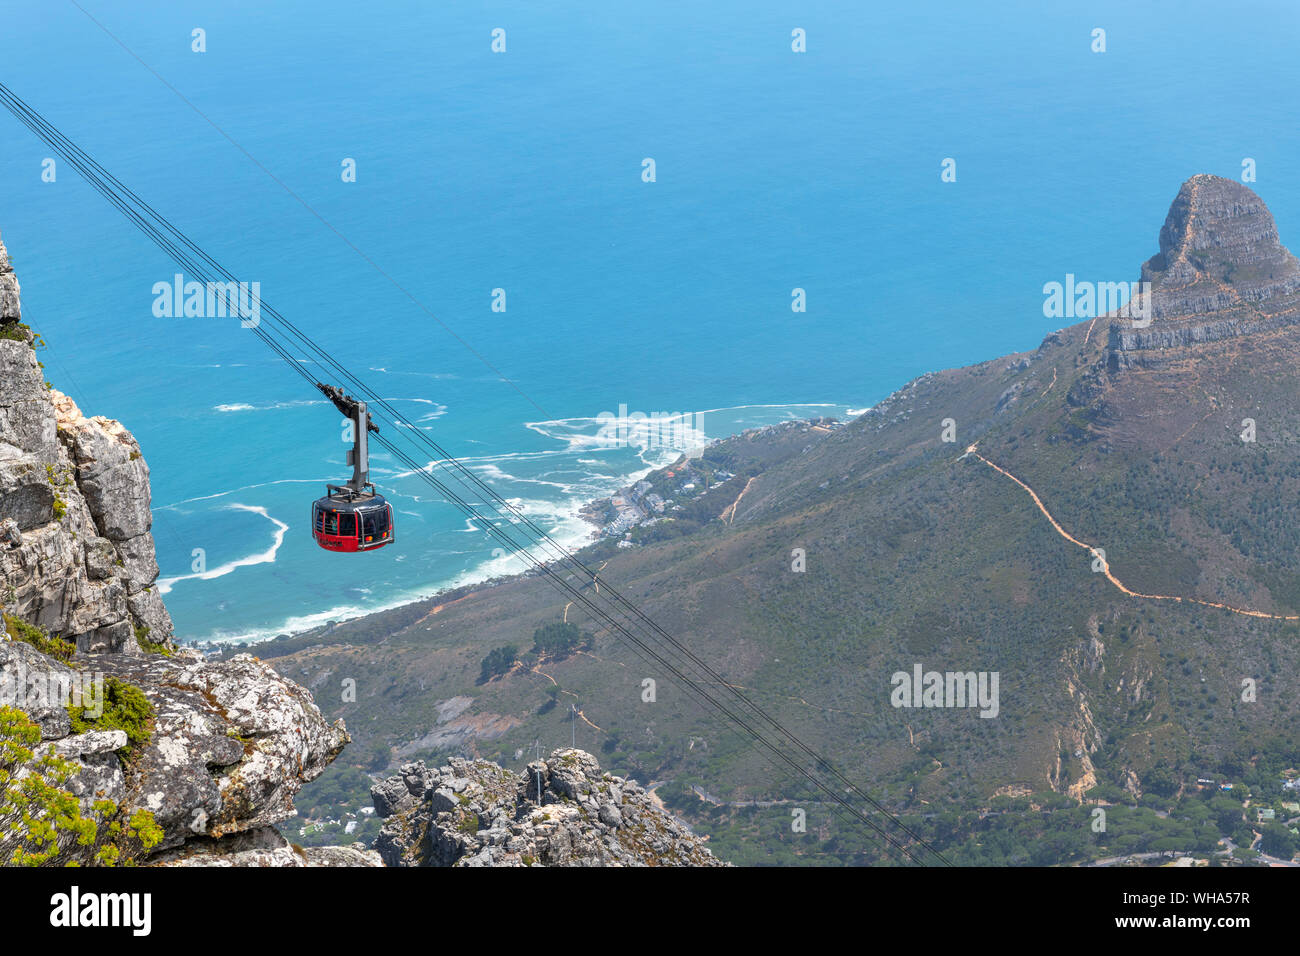 Cable car of the Table Mountain Aerial Cableway ascending to the top station, Table Mountain, Cape Town, South Africa Stock Photo